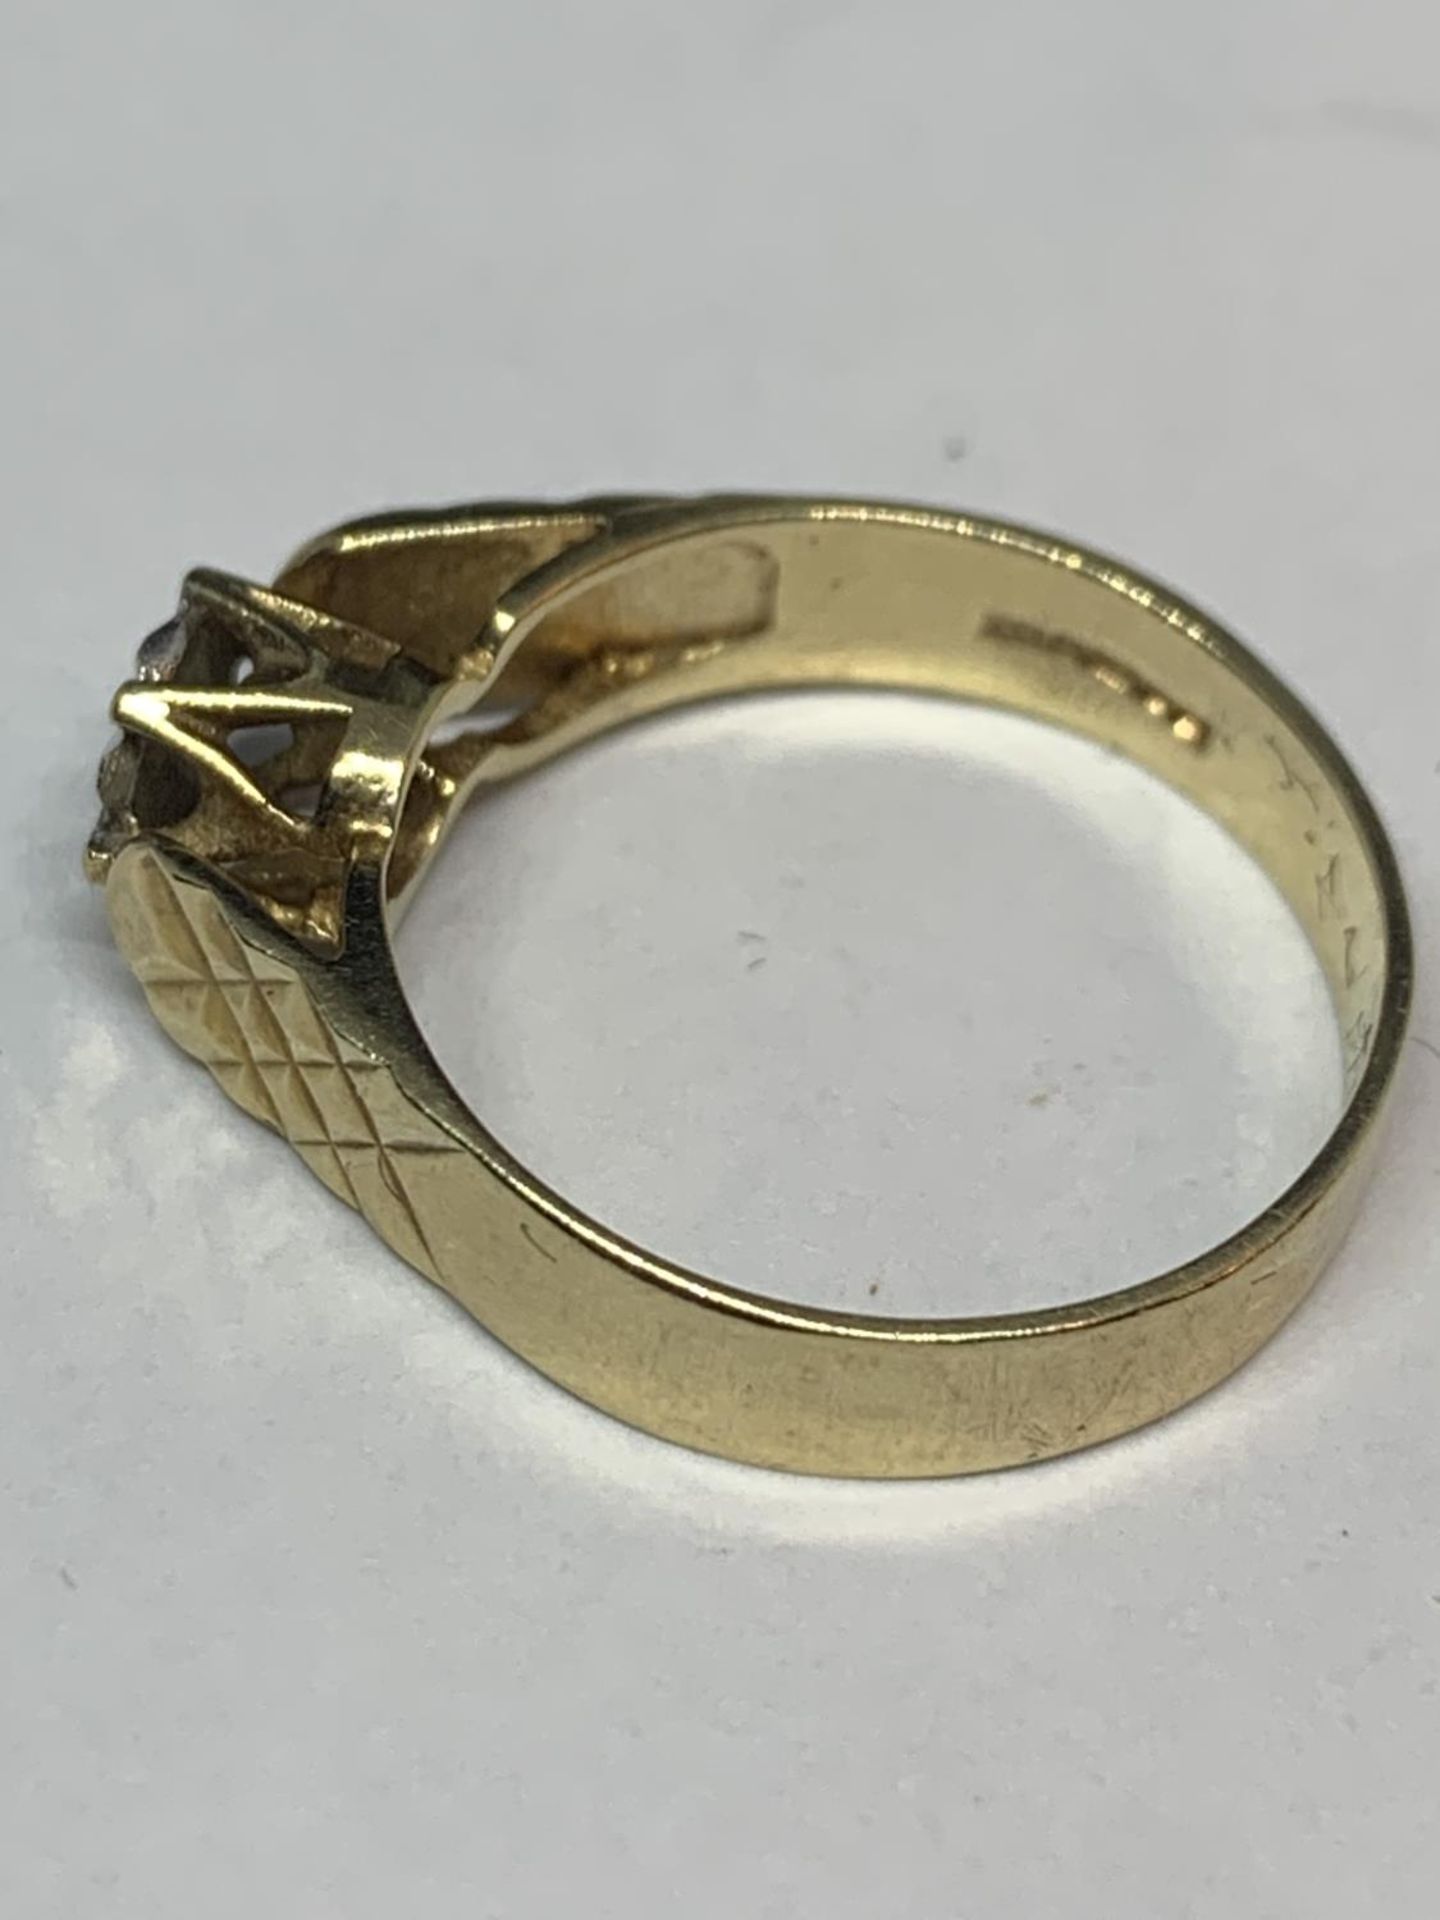 A 9 CARAT GOLD DIAMOND CHIP RING WITH DECORATIVE SHOULDERS SIZE L/M - Image 2 of 4